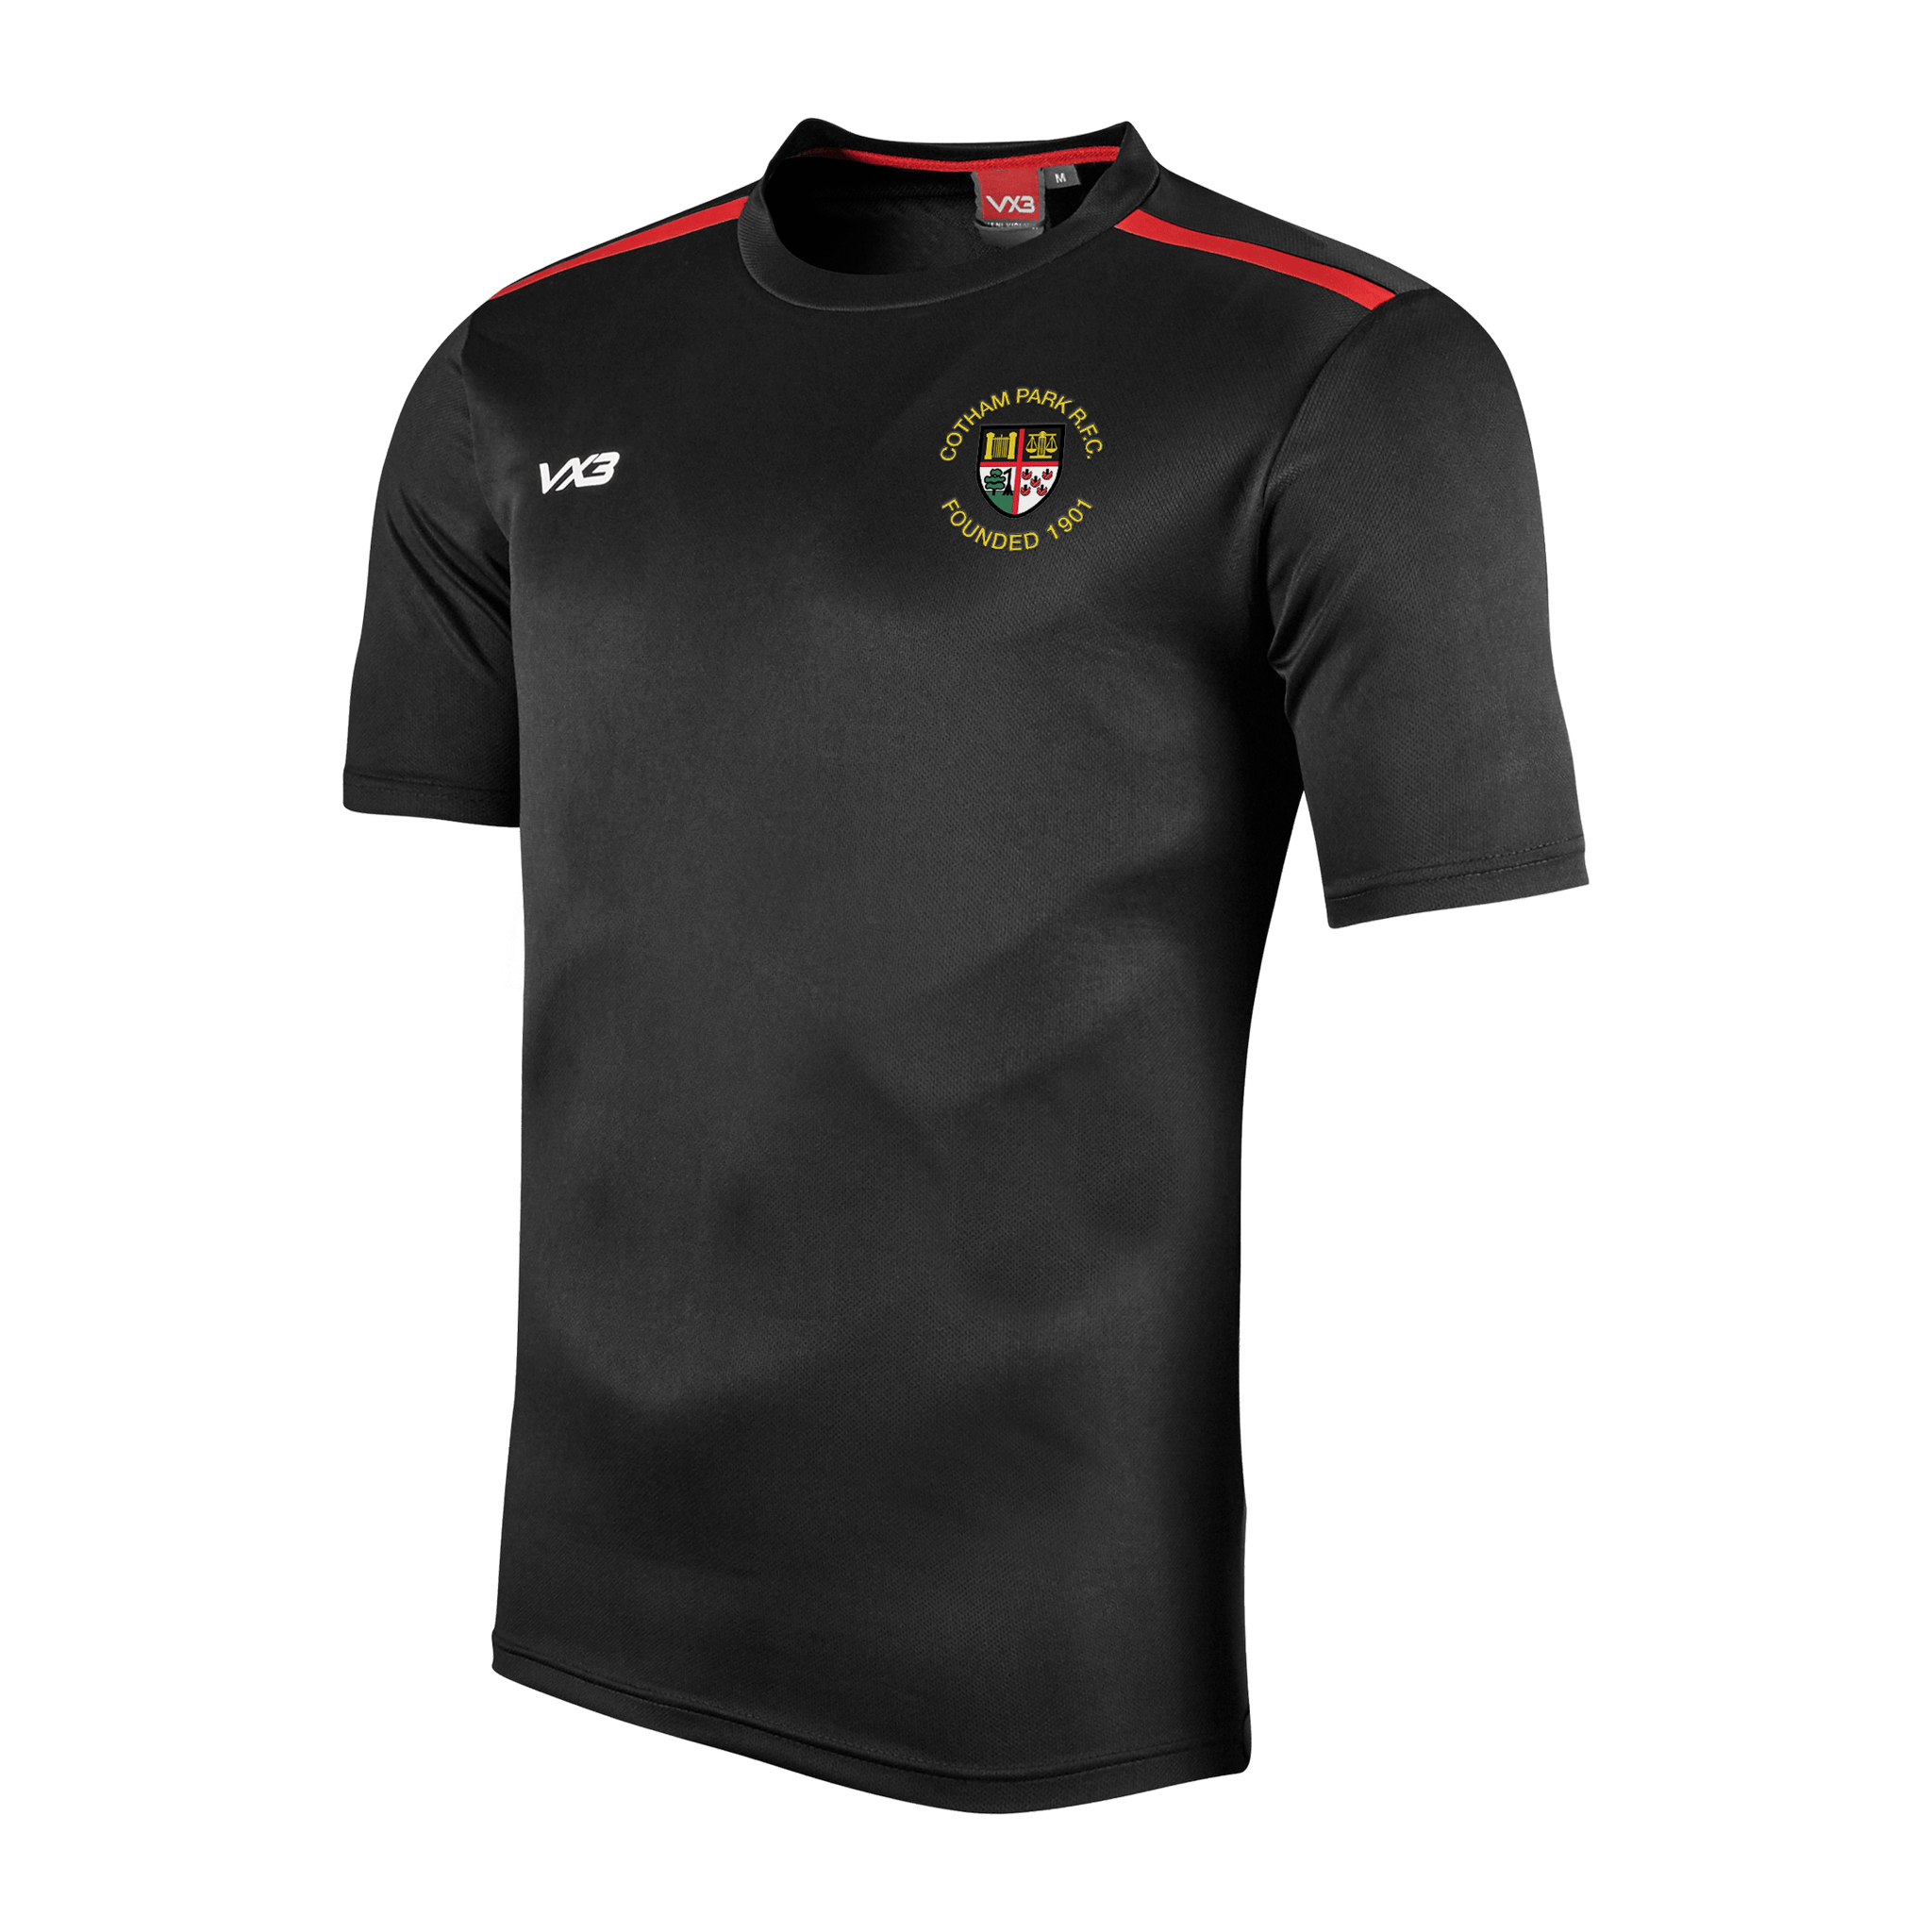 Cotham Park RFC Fortis Youth Tee